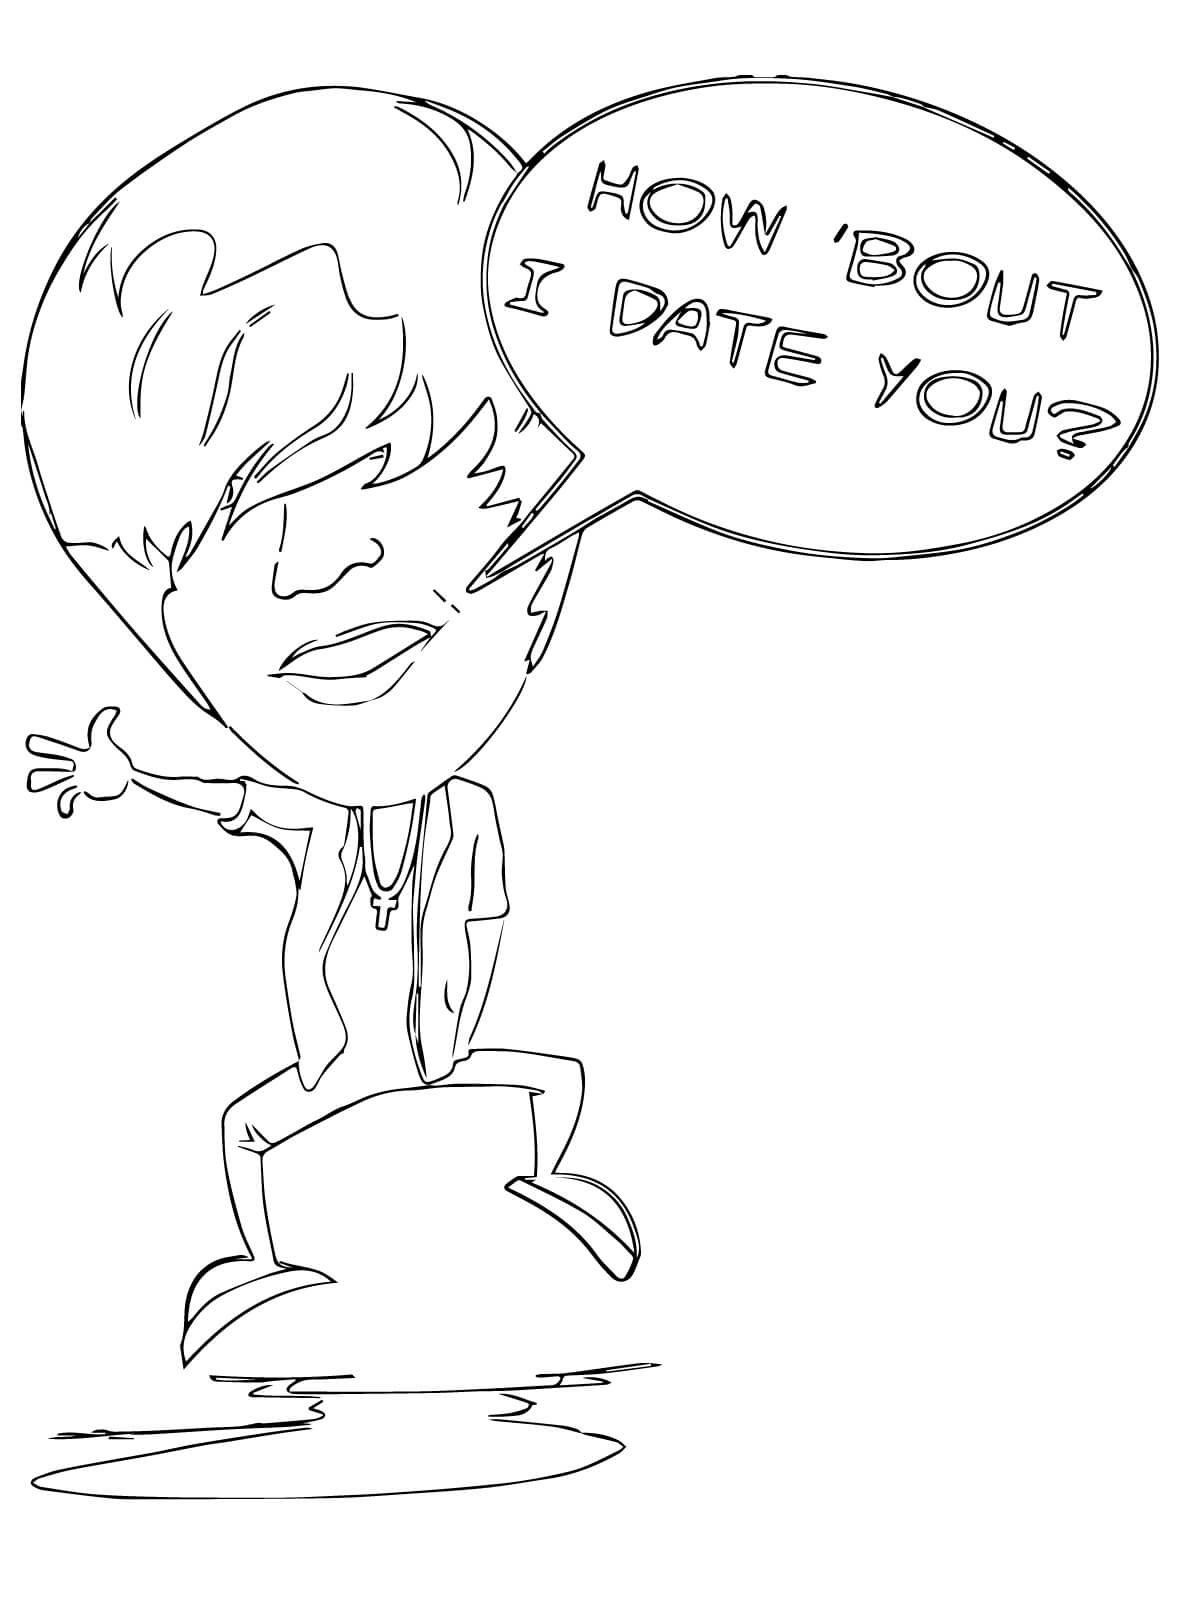 Justin Bieber Date You Coloring Page